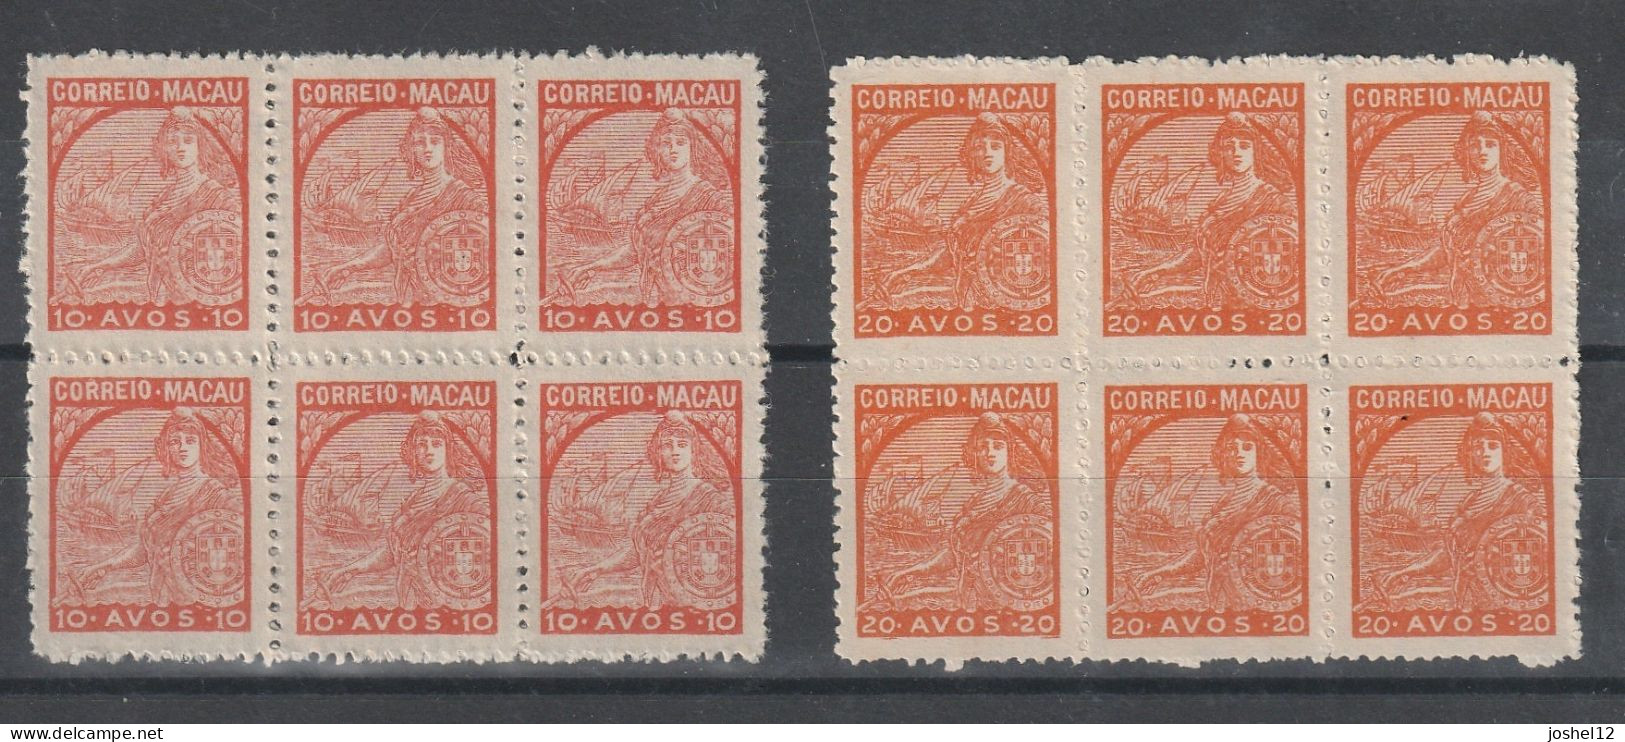 Macau Macao 1942 Padroes Set Sin Chun Print Thick Paper Block Of 6. MNH/No Gum As Issued. - Ungebraucht